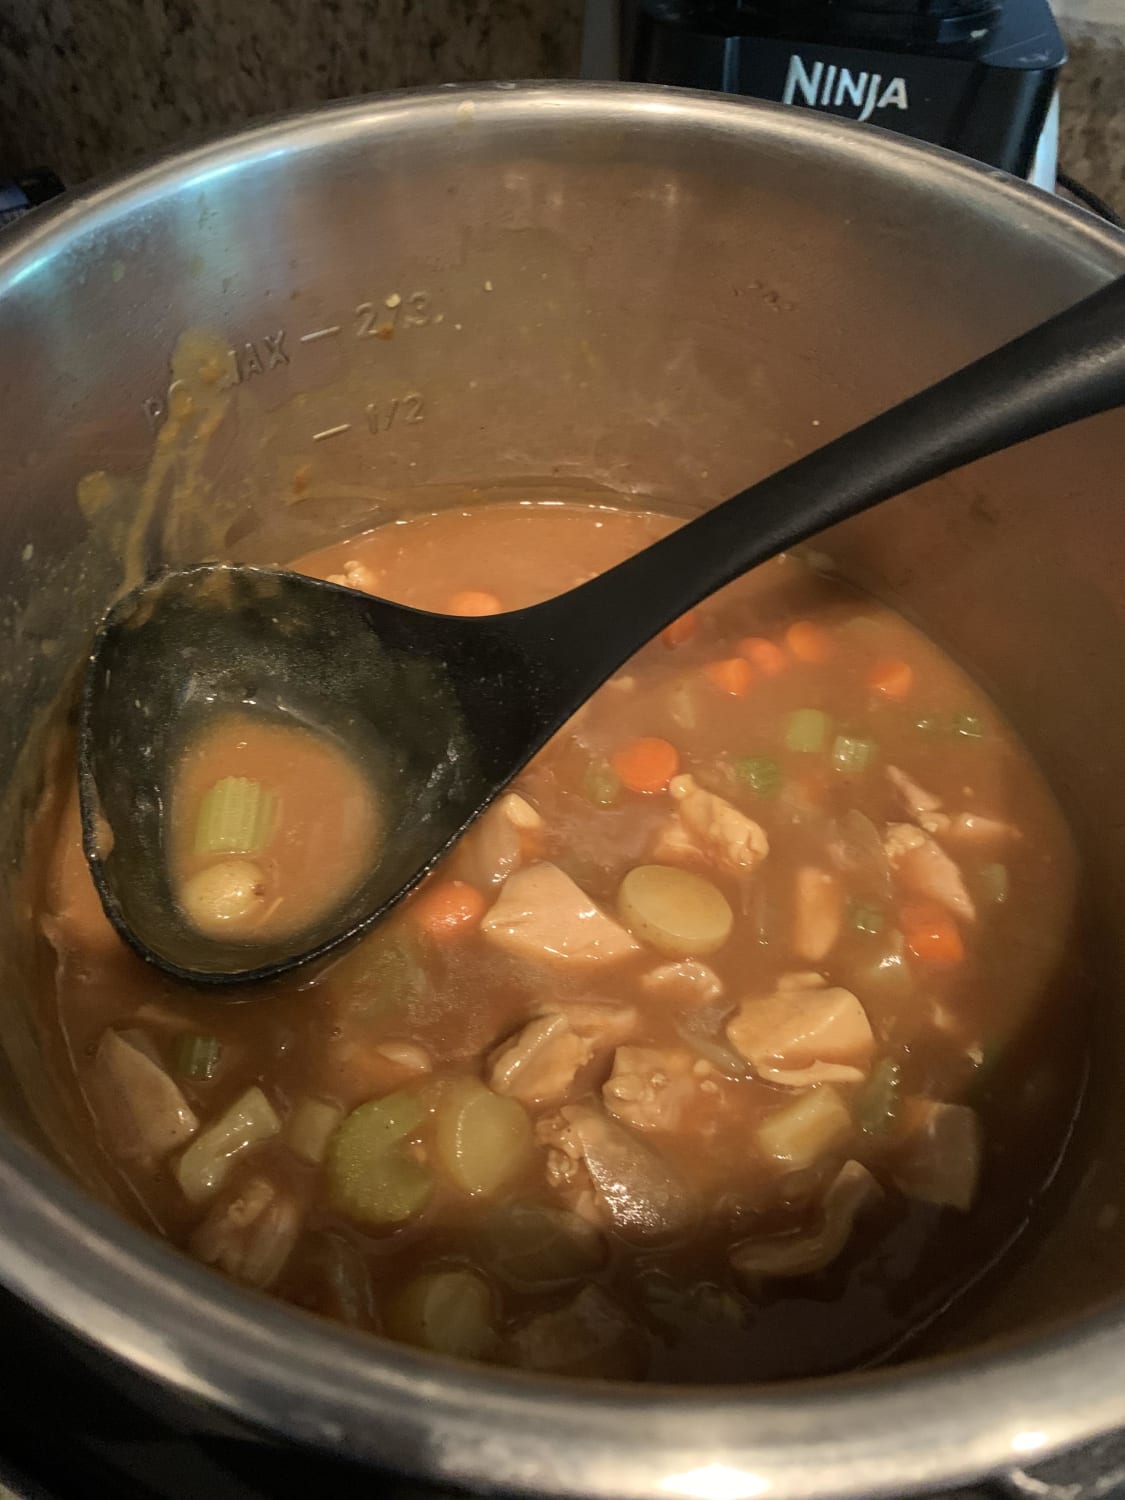 Used my IP to saute-boil-simmer a batch of Japanese curry with diced chicken thighs, onions, carrots, celery, and potatoes. Added some garlic, ketchup, and worcestershire to a little extra twang.